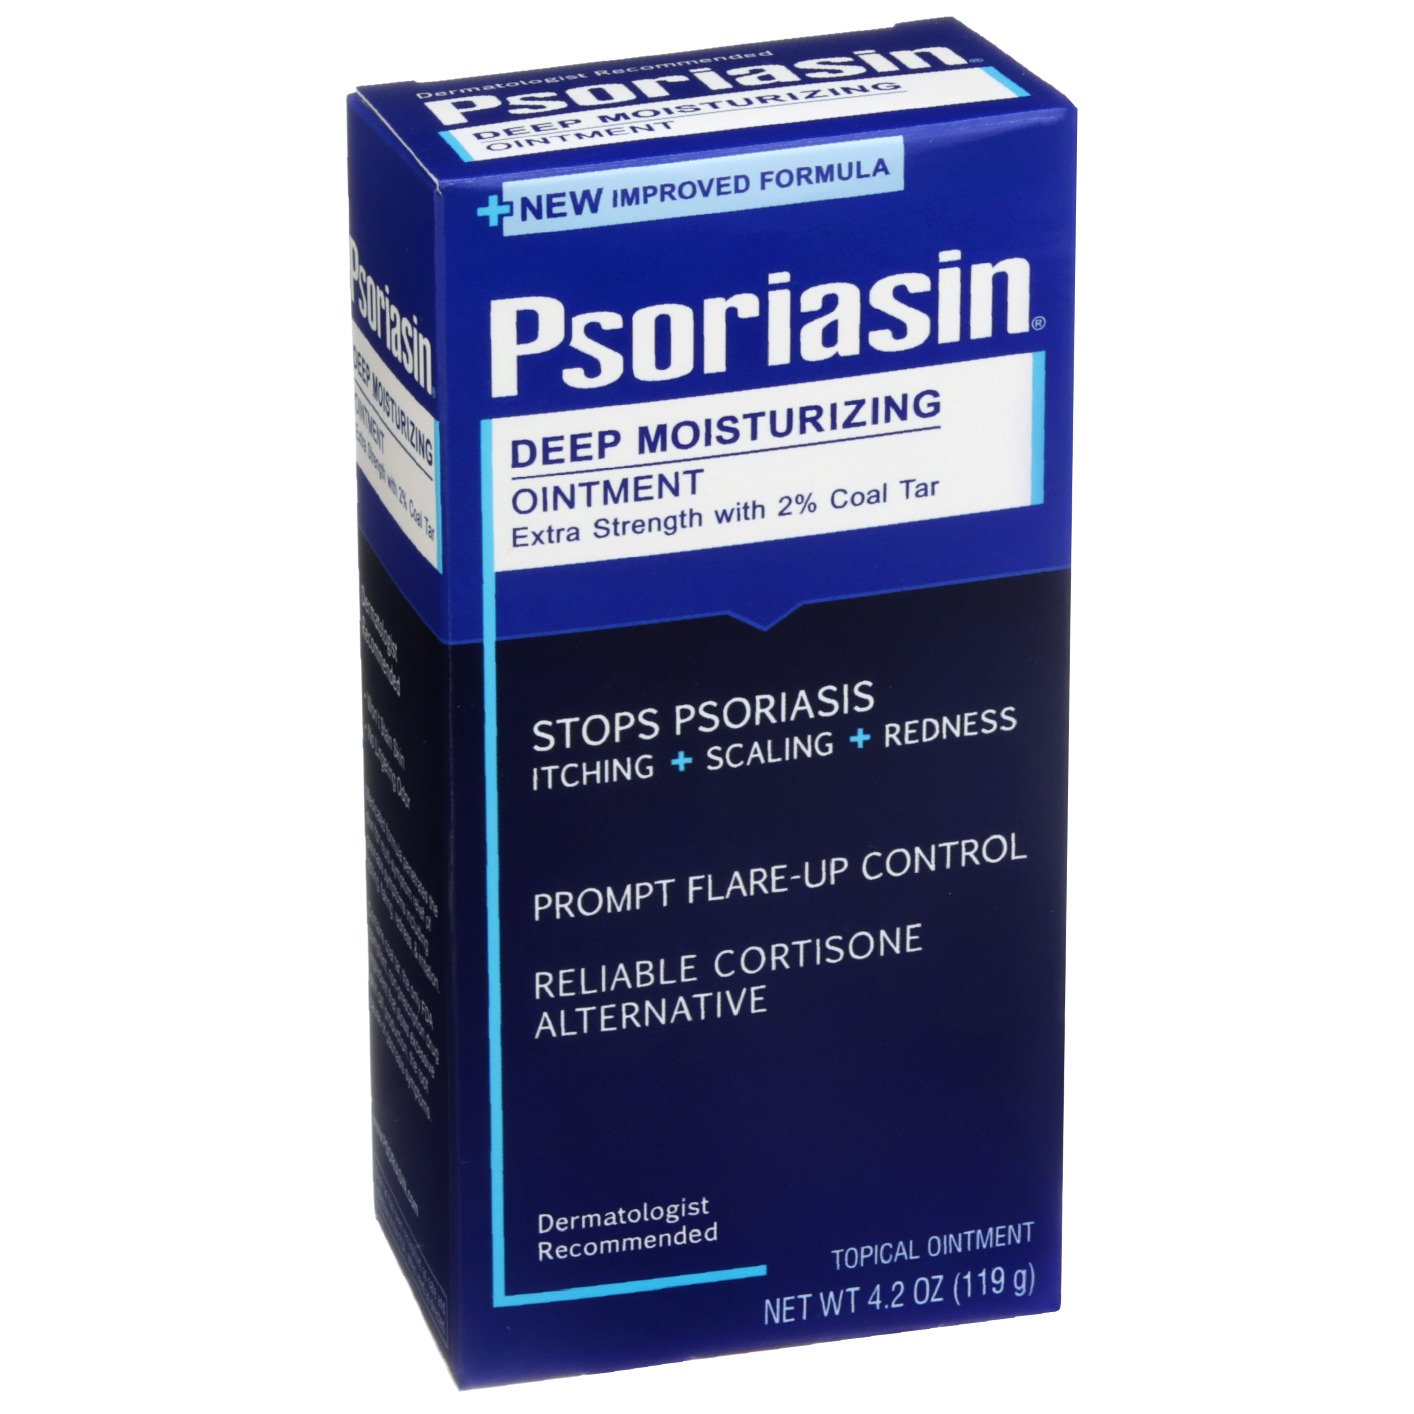 psoriasin ointment reviews